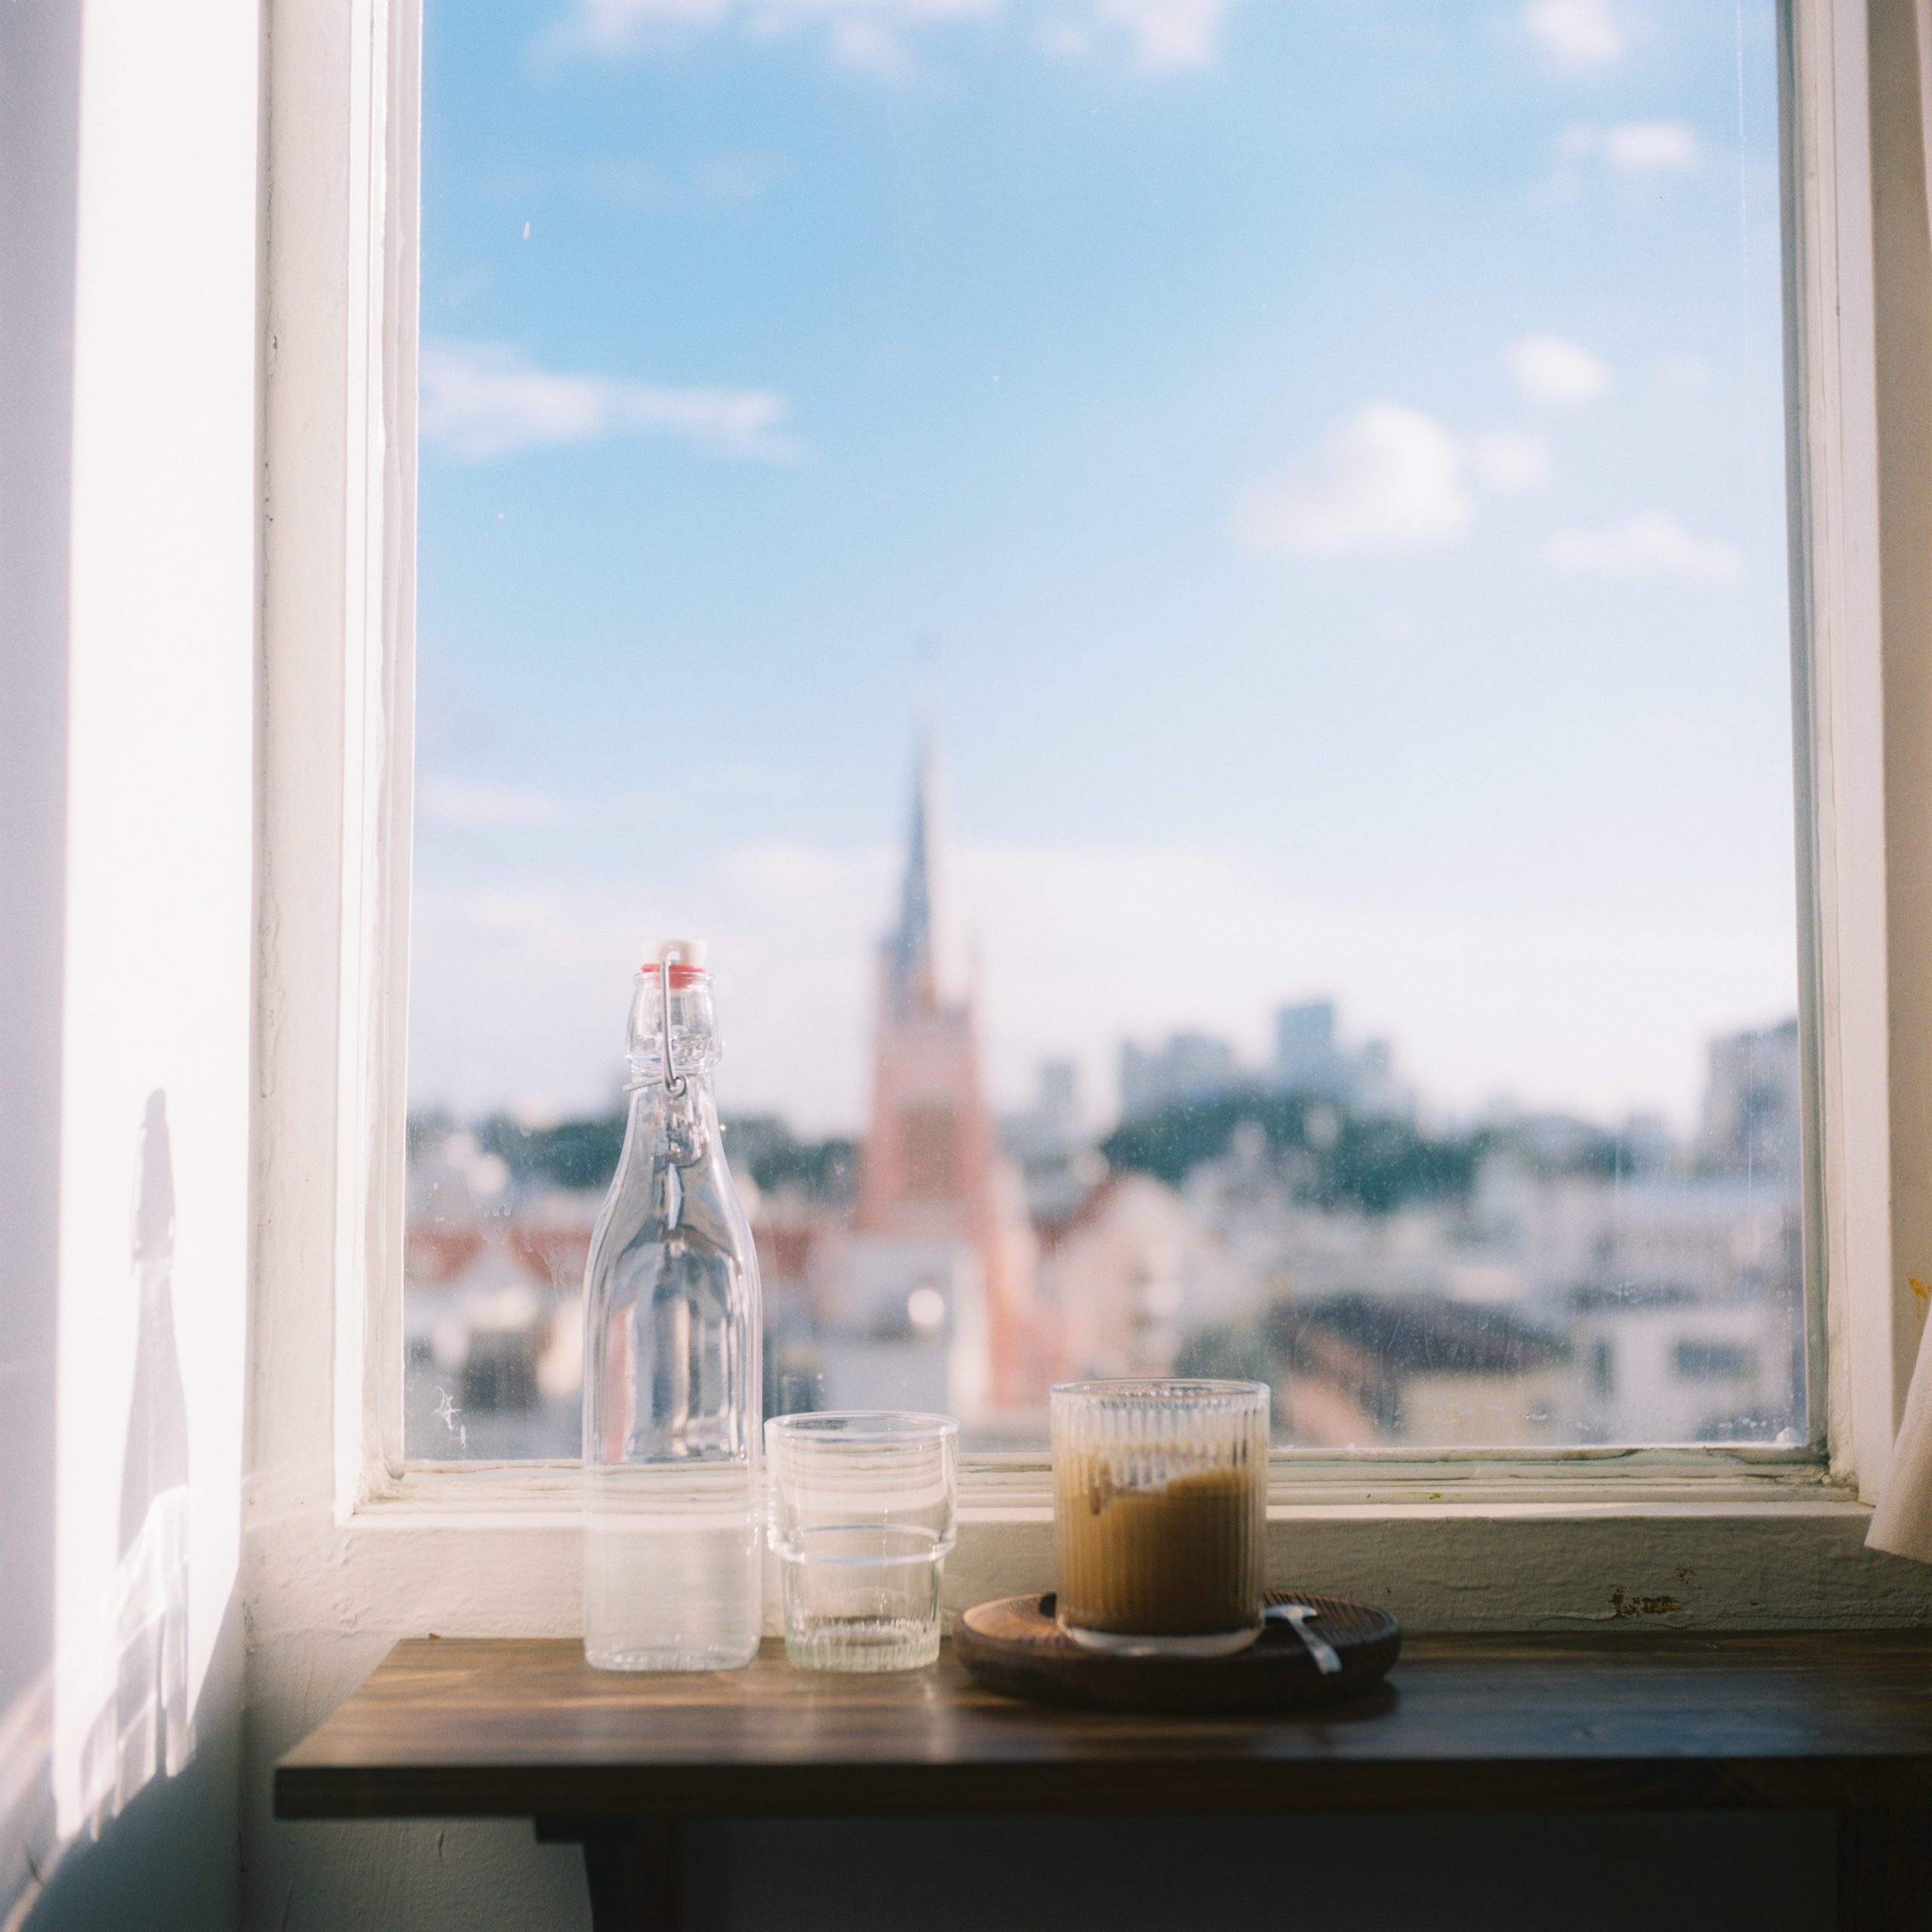 A glass of water on a window sill with a view of a city.